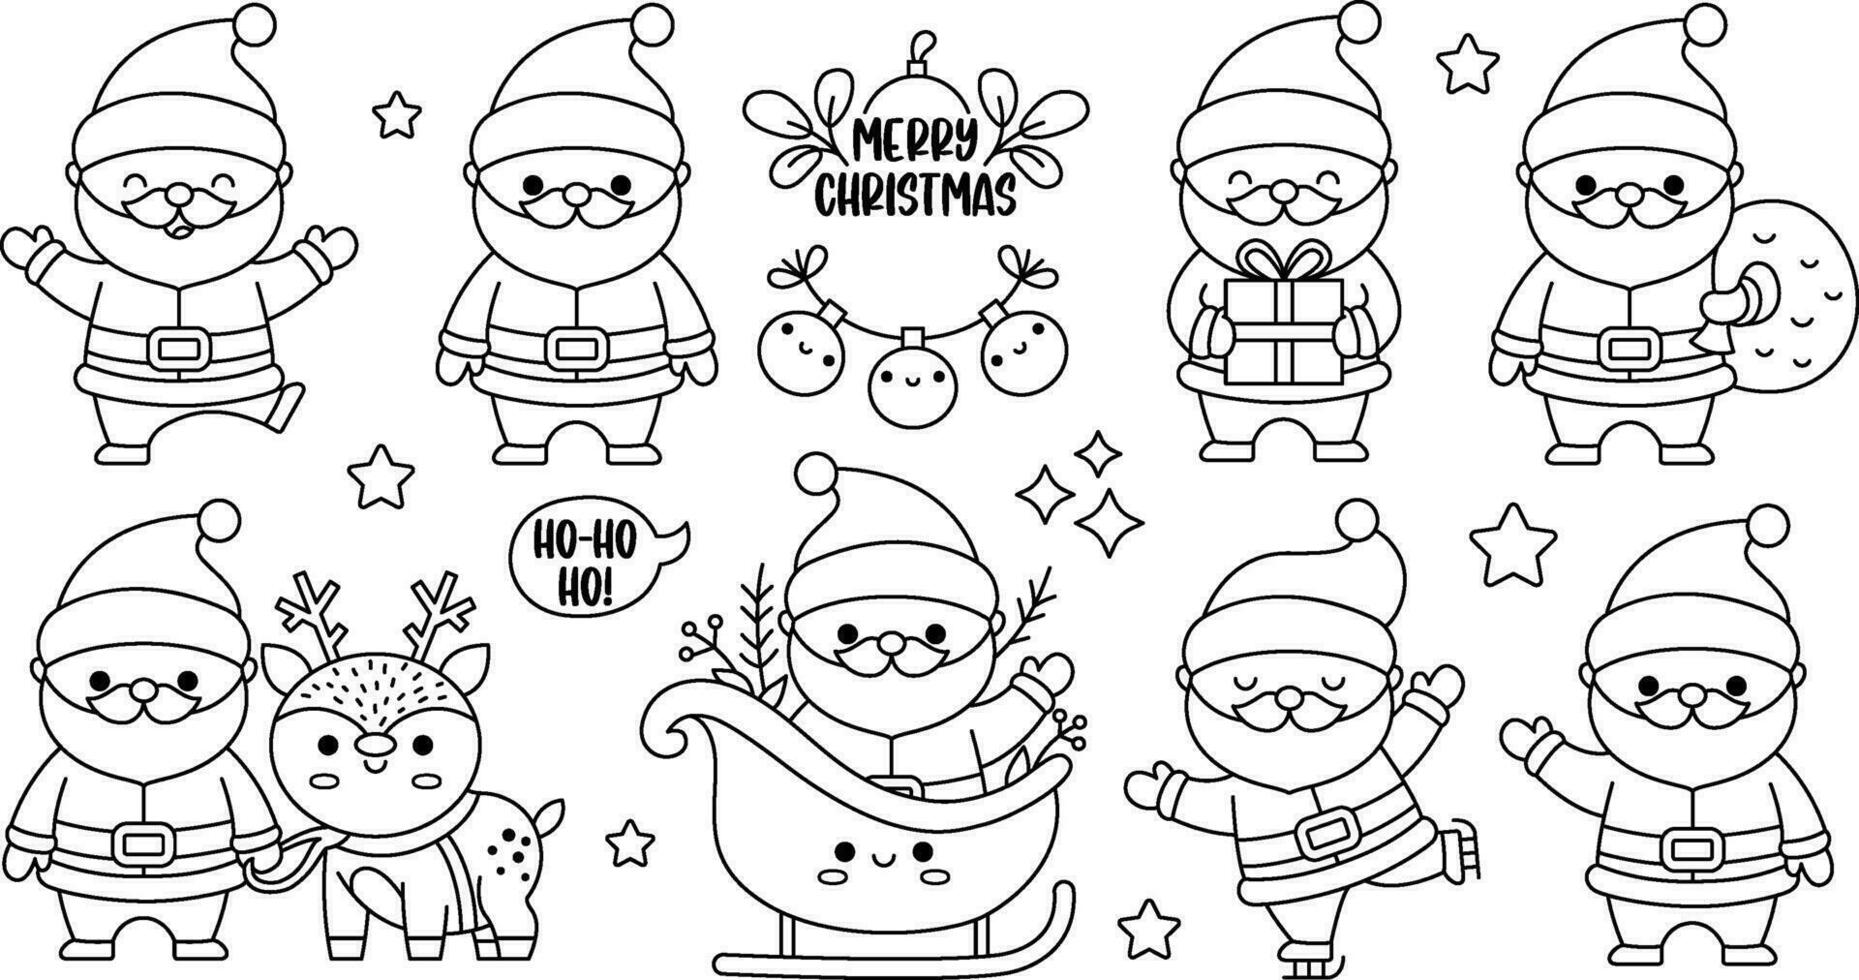 Vector black and white kawaii Santa Claus set. Cute Santas with present, sack, sleigh, skating. Father Frost illustration. Christmas, winter, New Year character. Funny line icon, coloring page pack